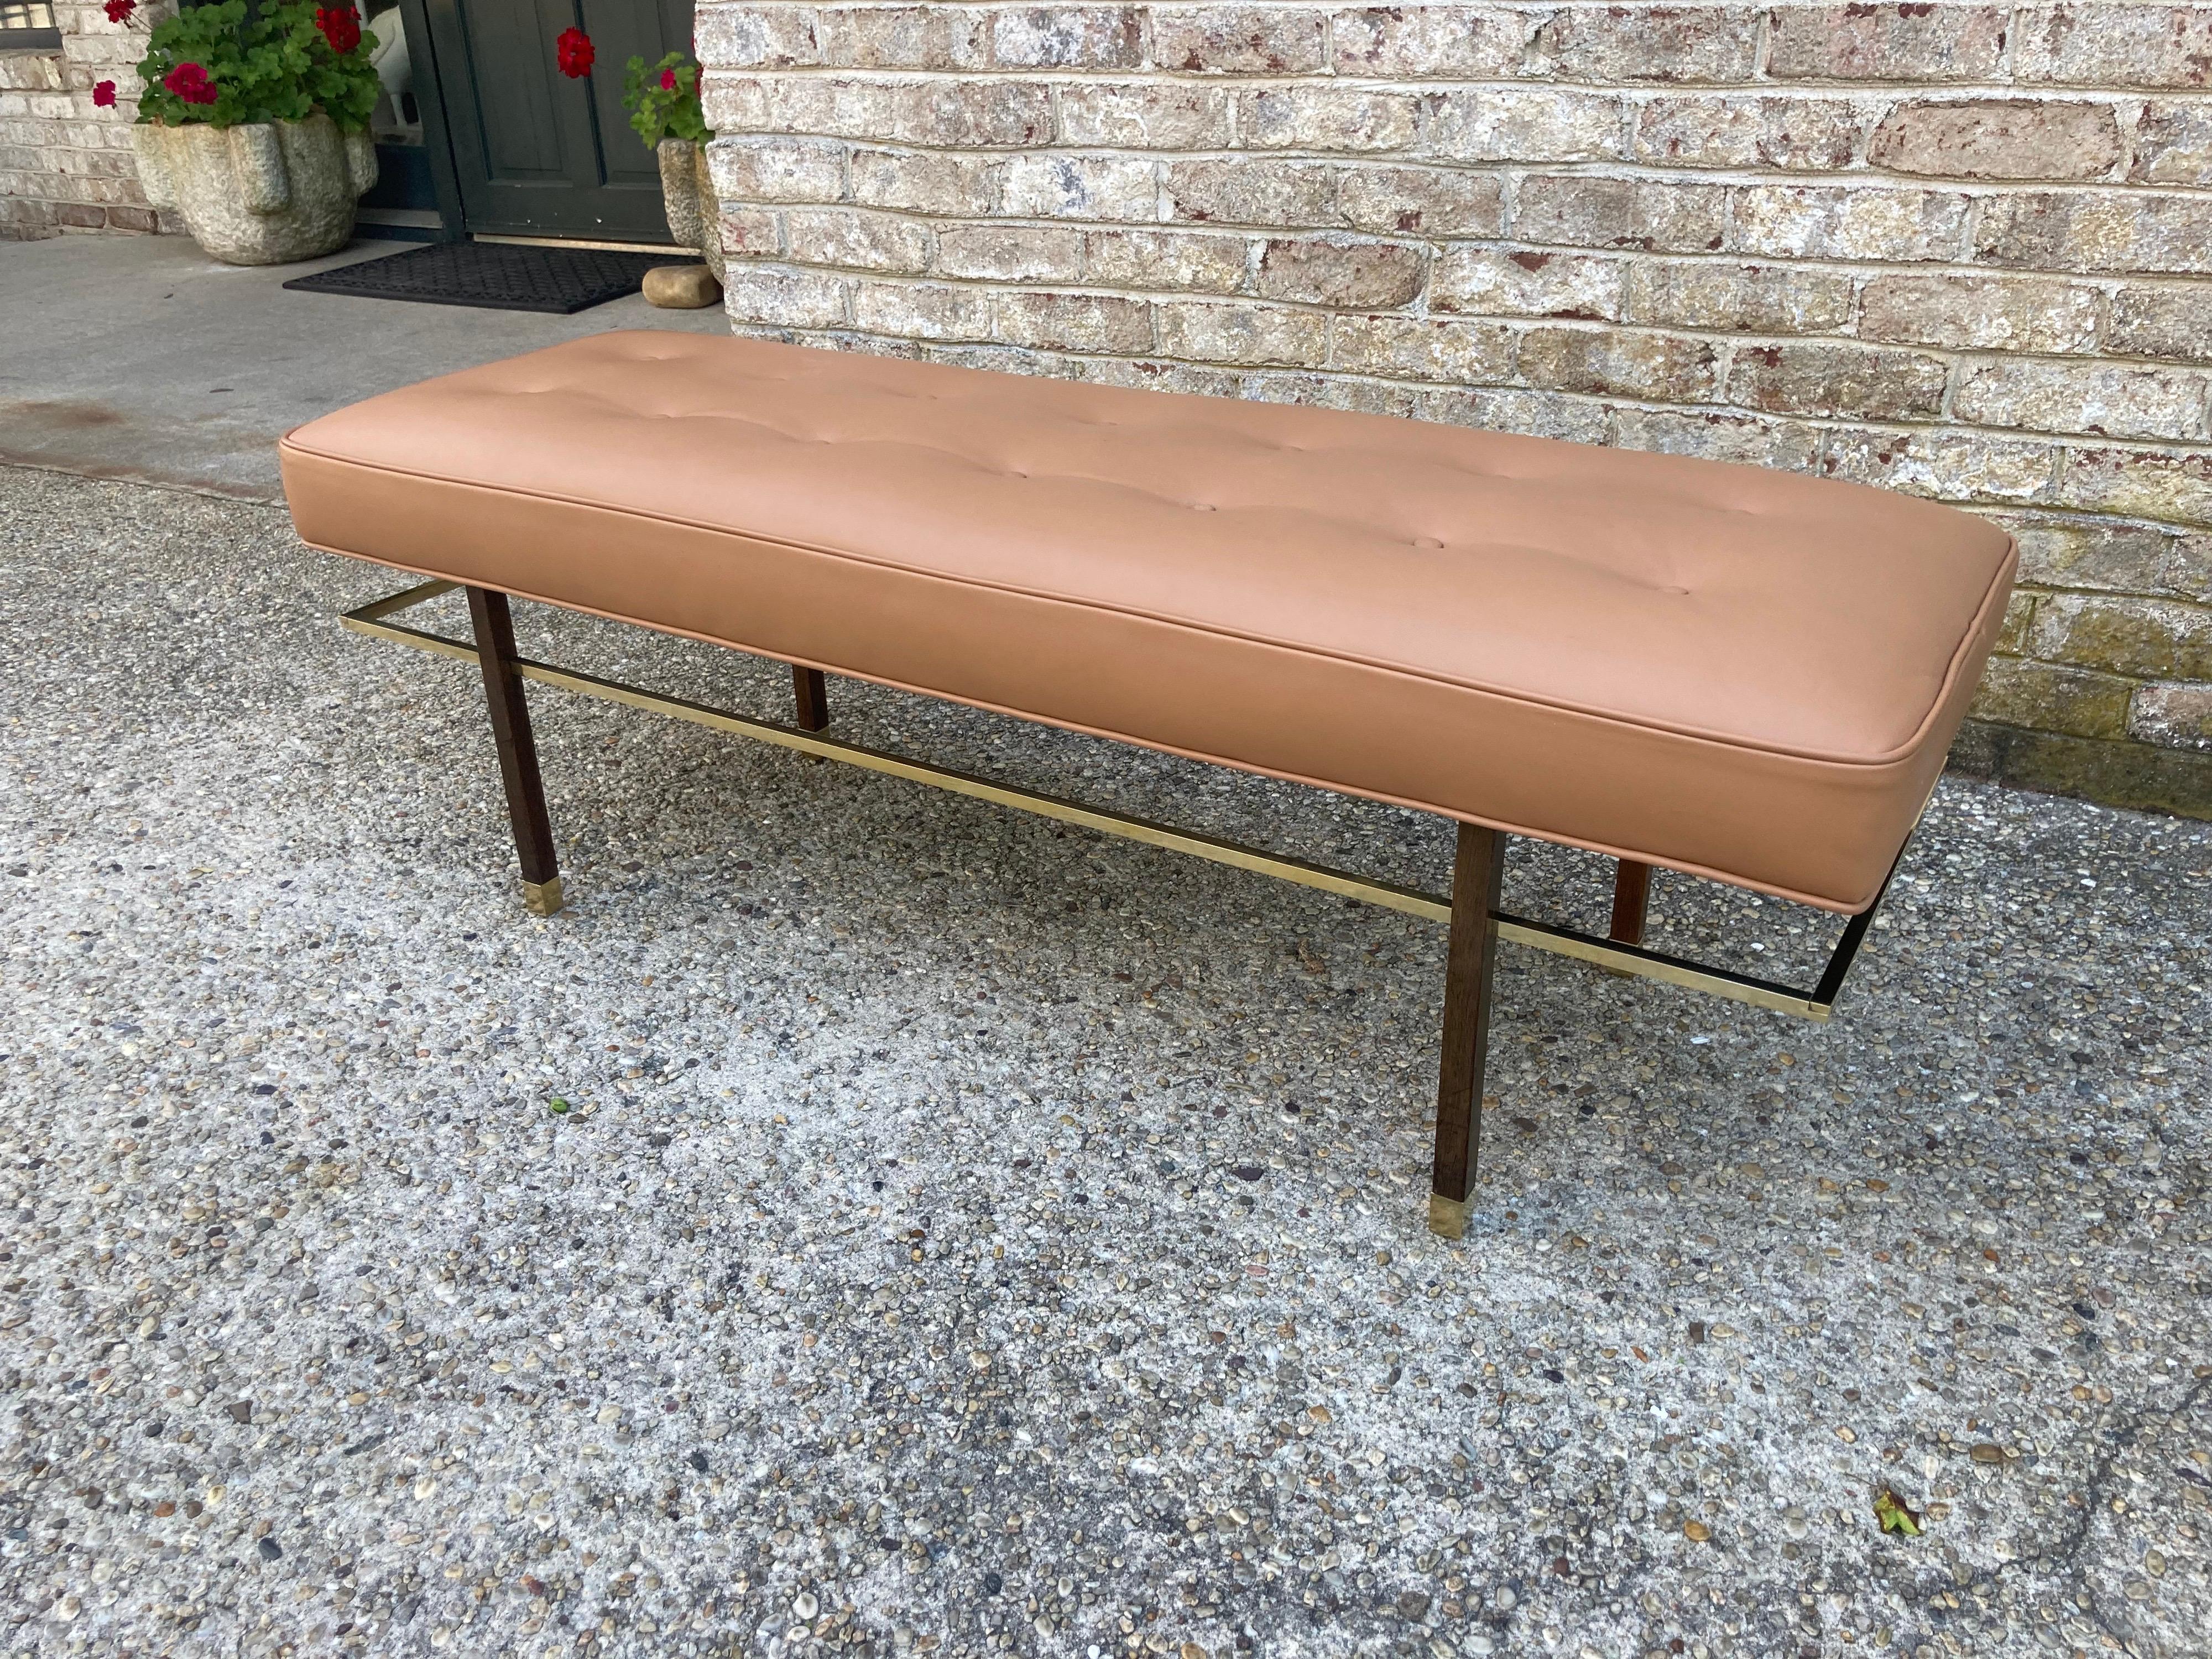 Harvey Probber brass and wood frame bench upholstered in camel colored leather... elegant brass sabots and stretcher..... circa 1950....